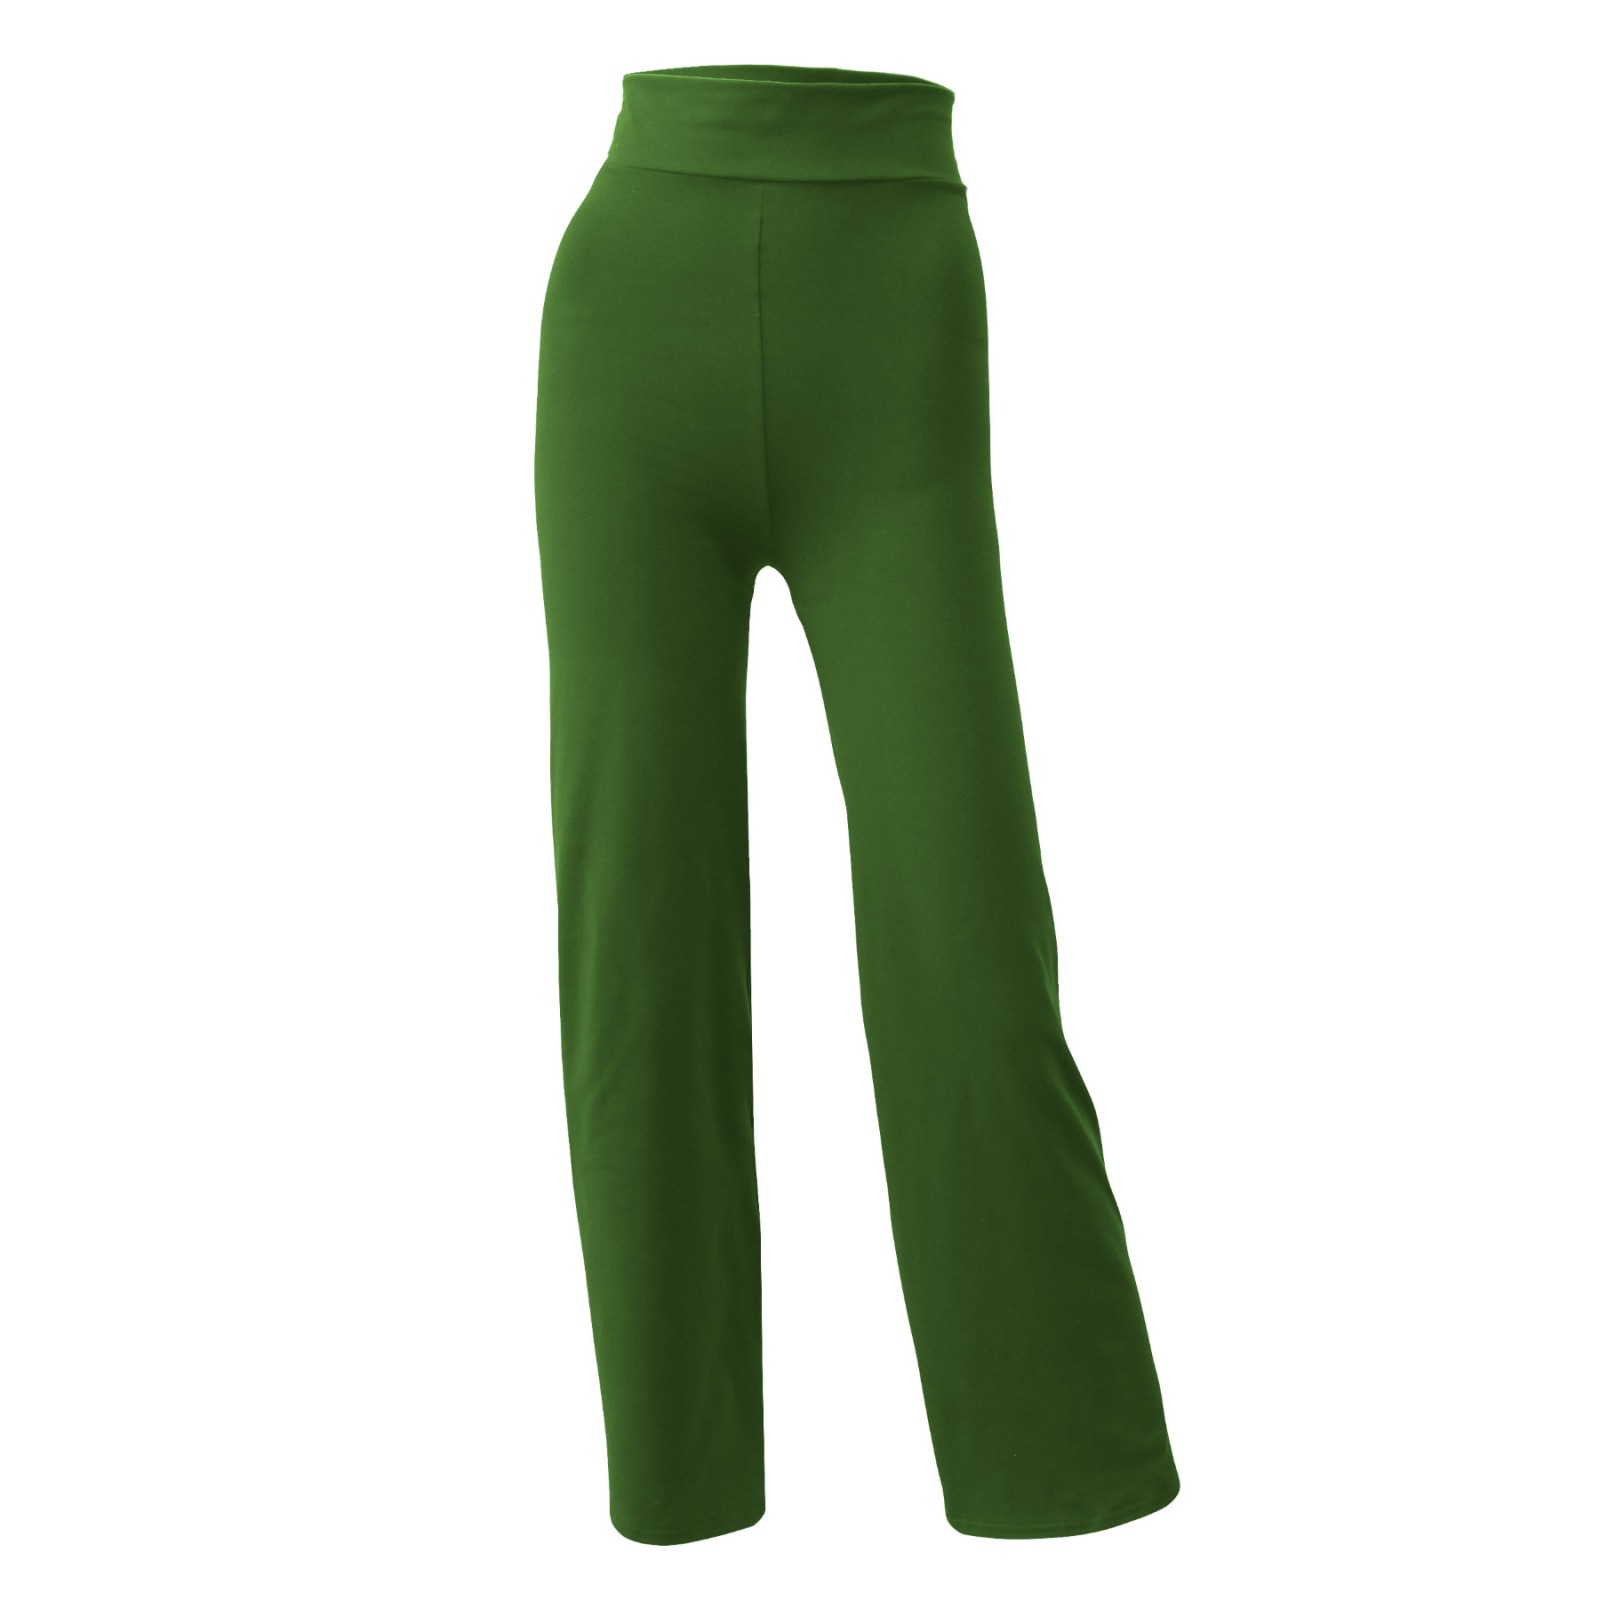 Yoga pants Relaxed Fit verde green